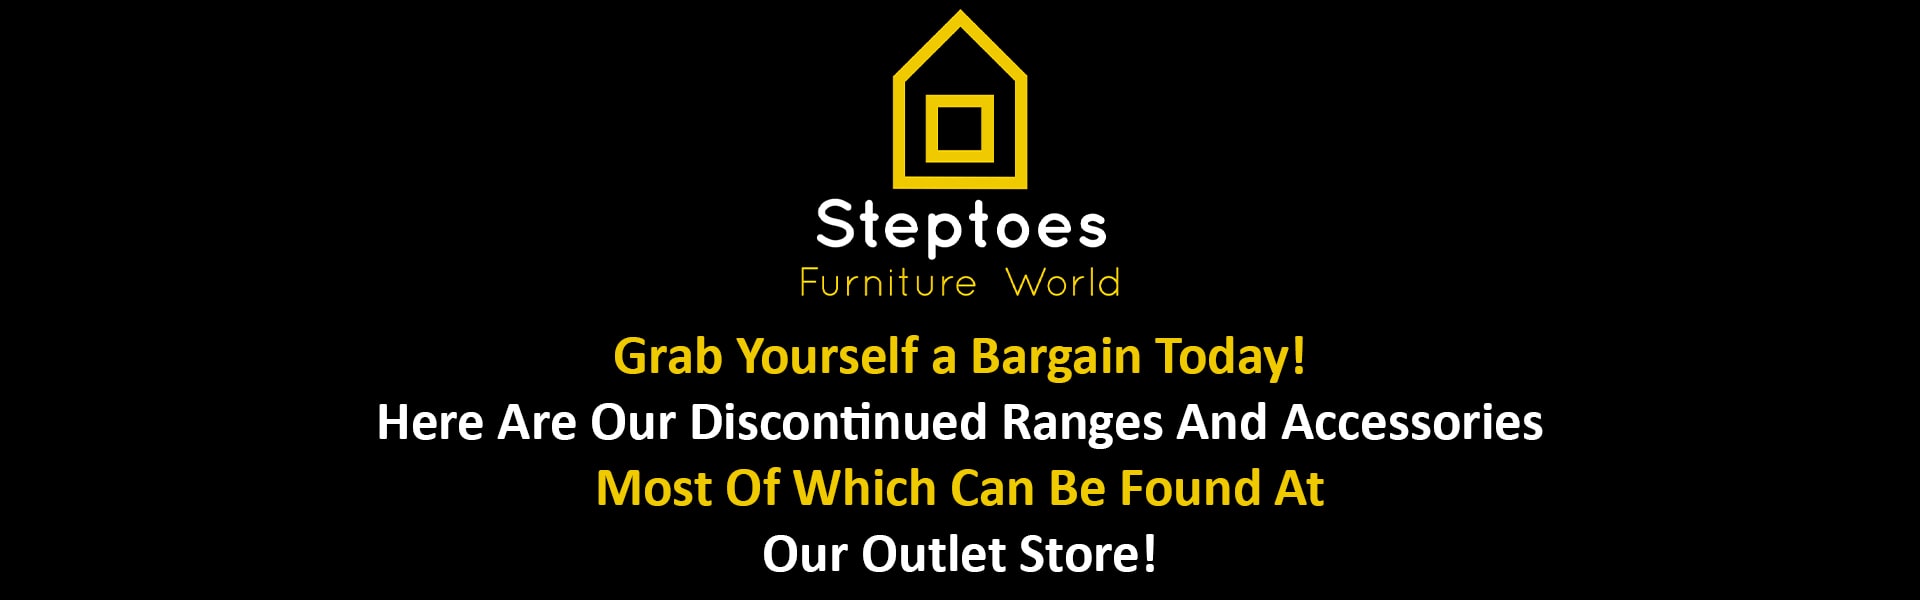 Order from home - Steptoes - Furniture - Dining - Living - Lounge - Bedroom - Occasional - Garden - Home Accessories - Interior - Design - Paphos - Cyprus